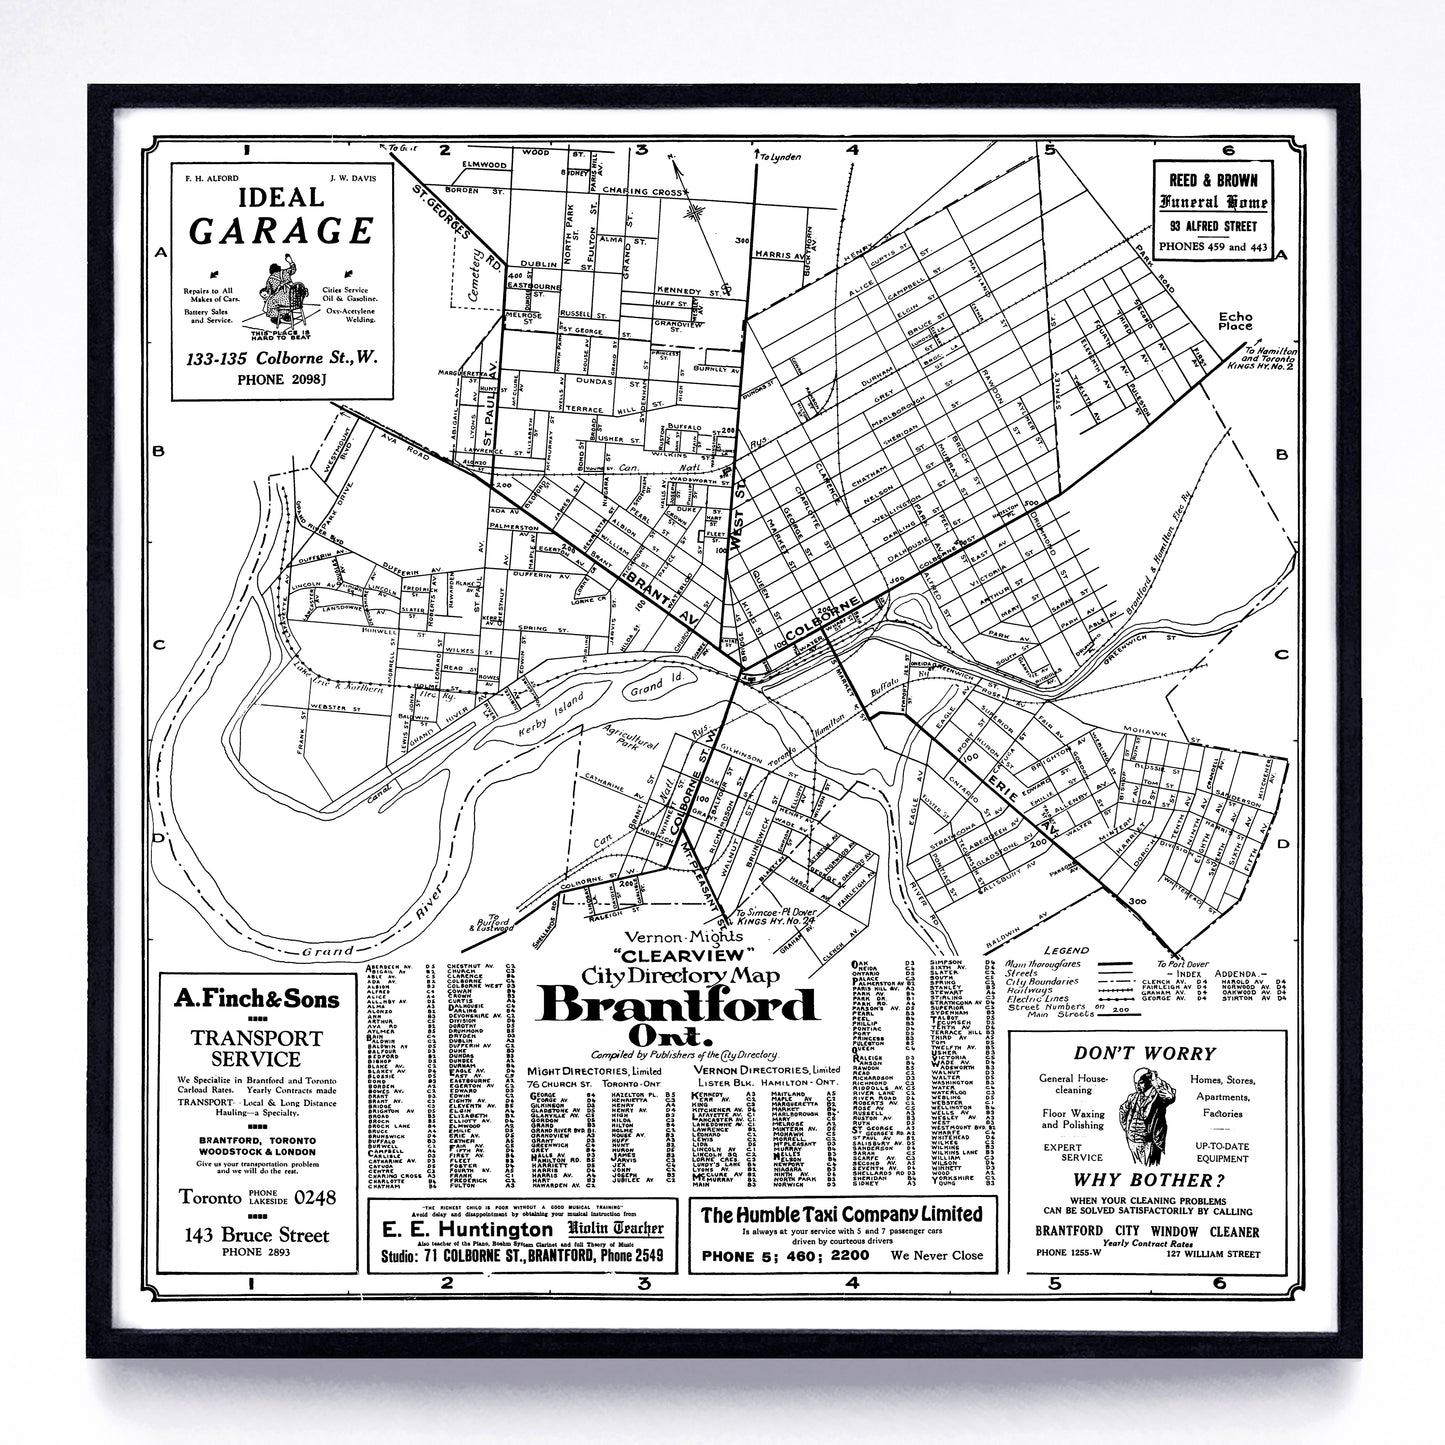 “Clearview City Directory Map (of) Brantford, Ont.” print by Vernon-Might (1931)